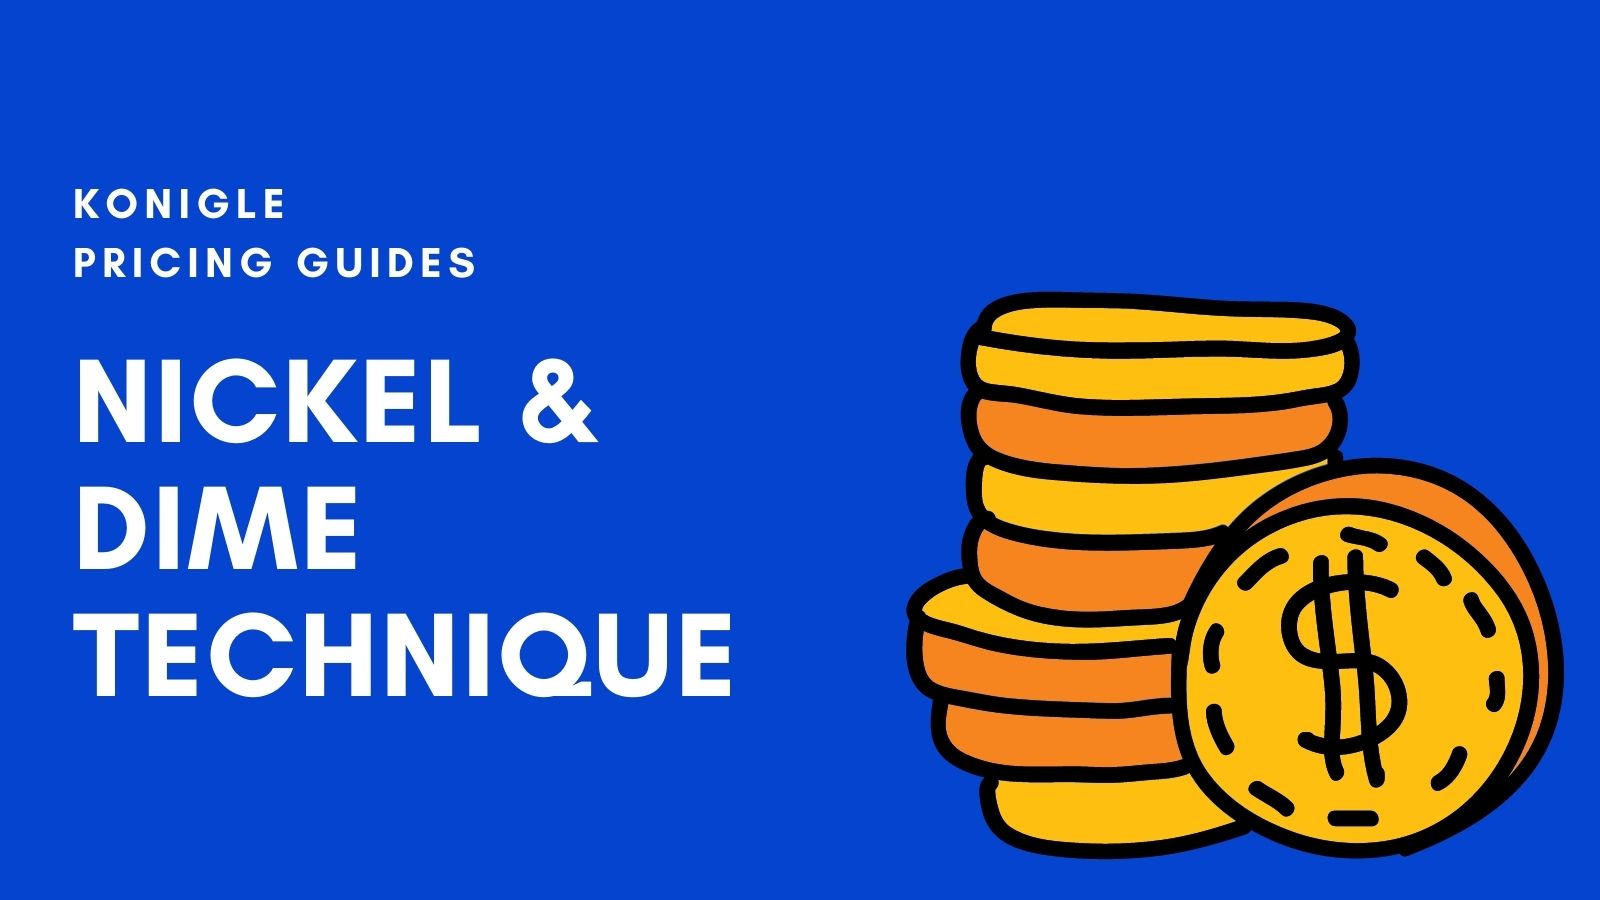 Nickel and dime pricing technique